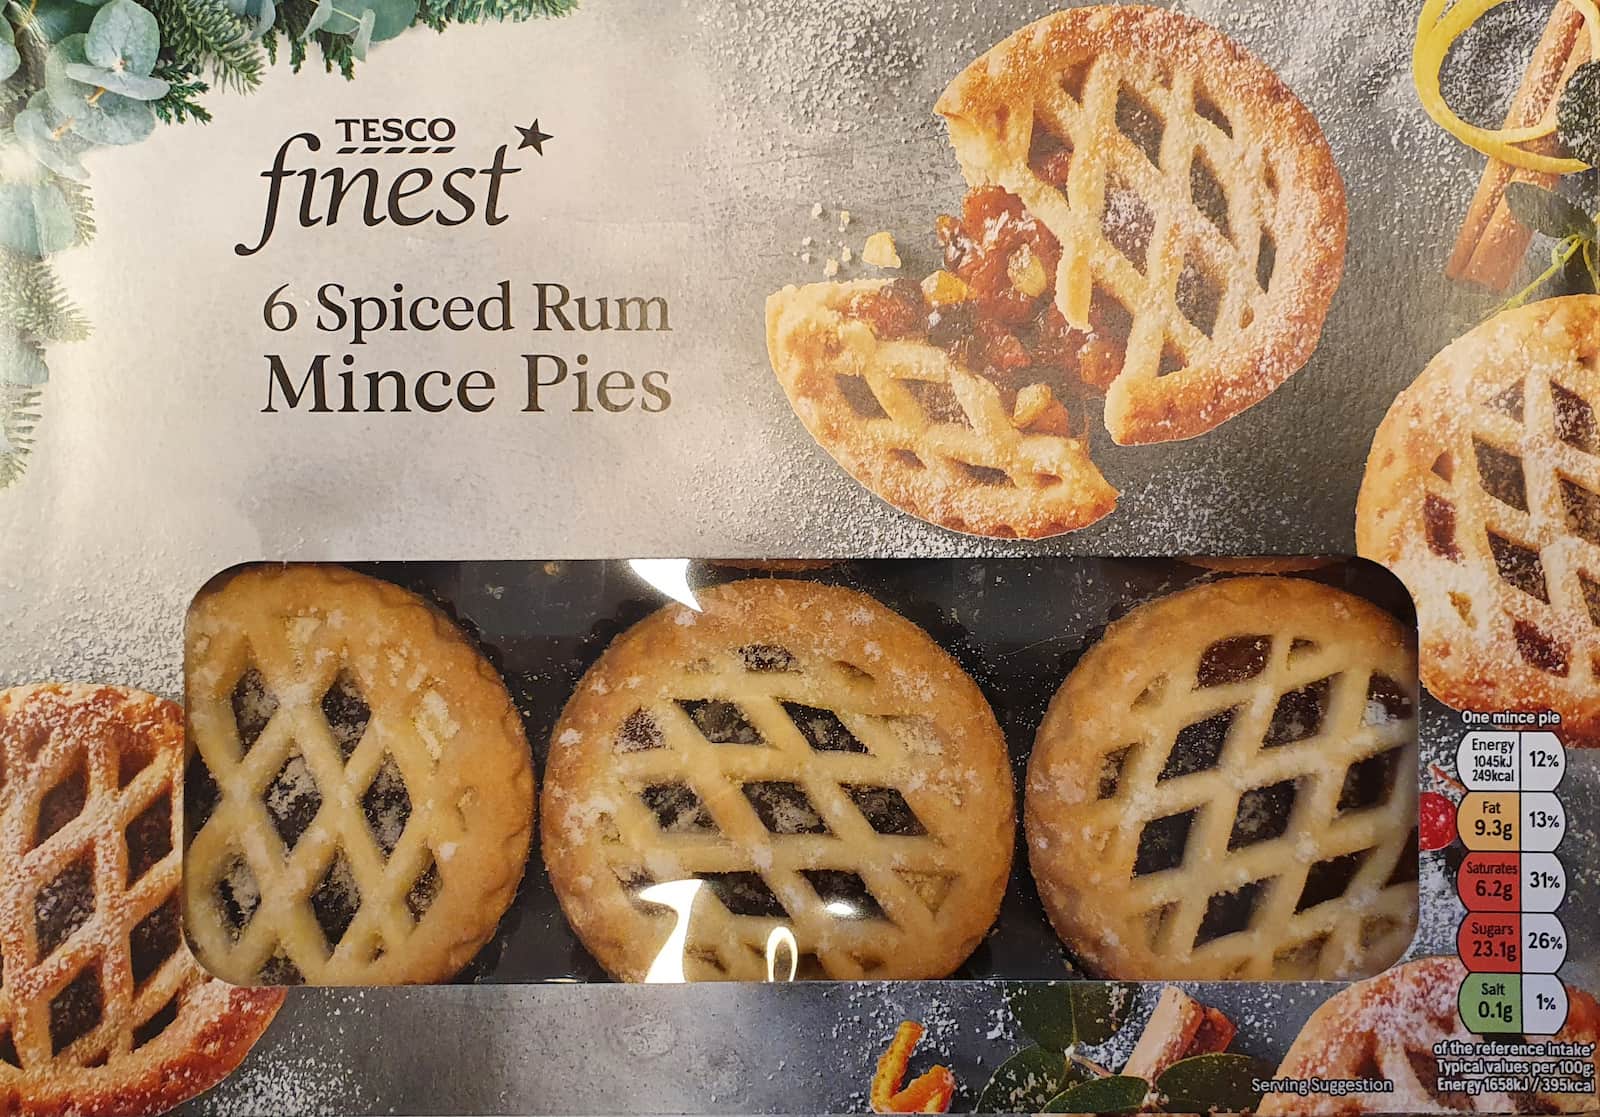 Tesco Finest Spiced Rum Mince Pie Review 2021